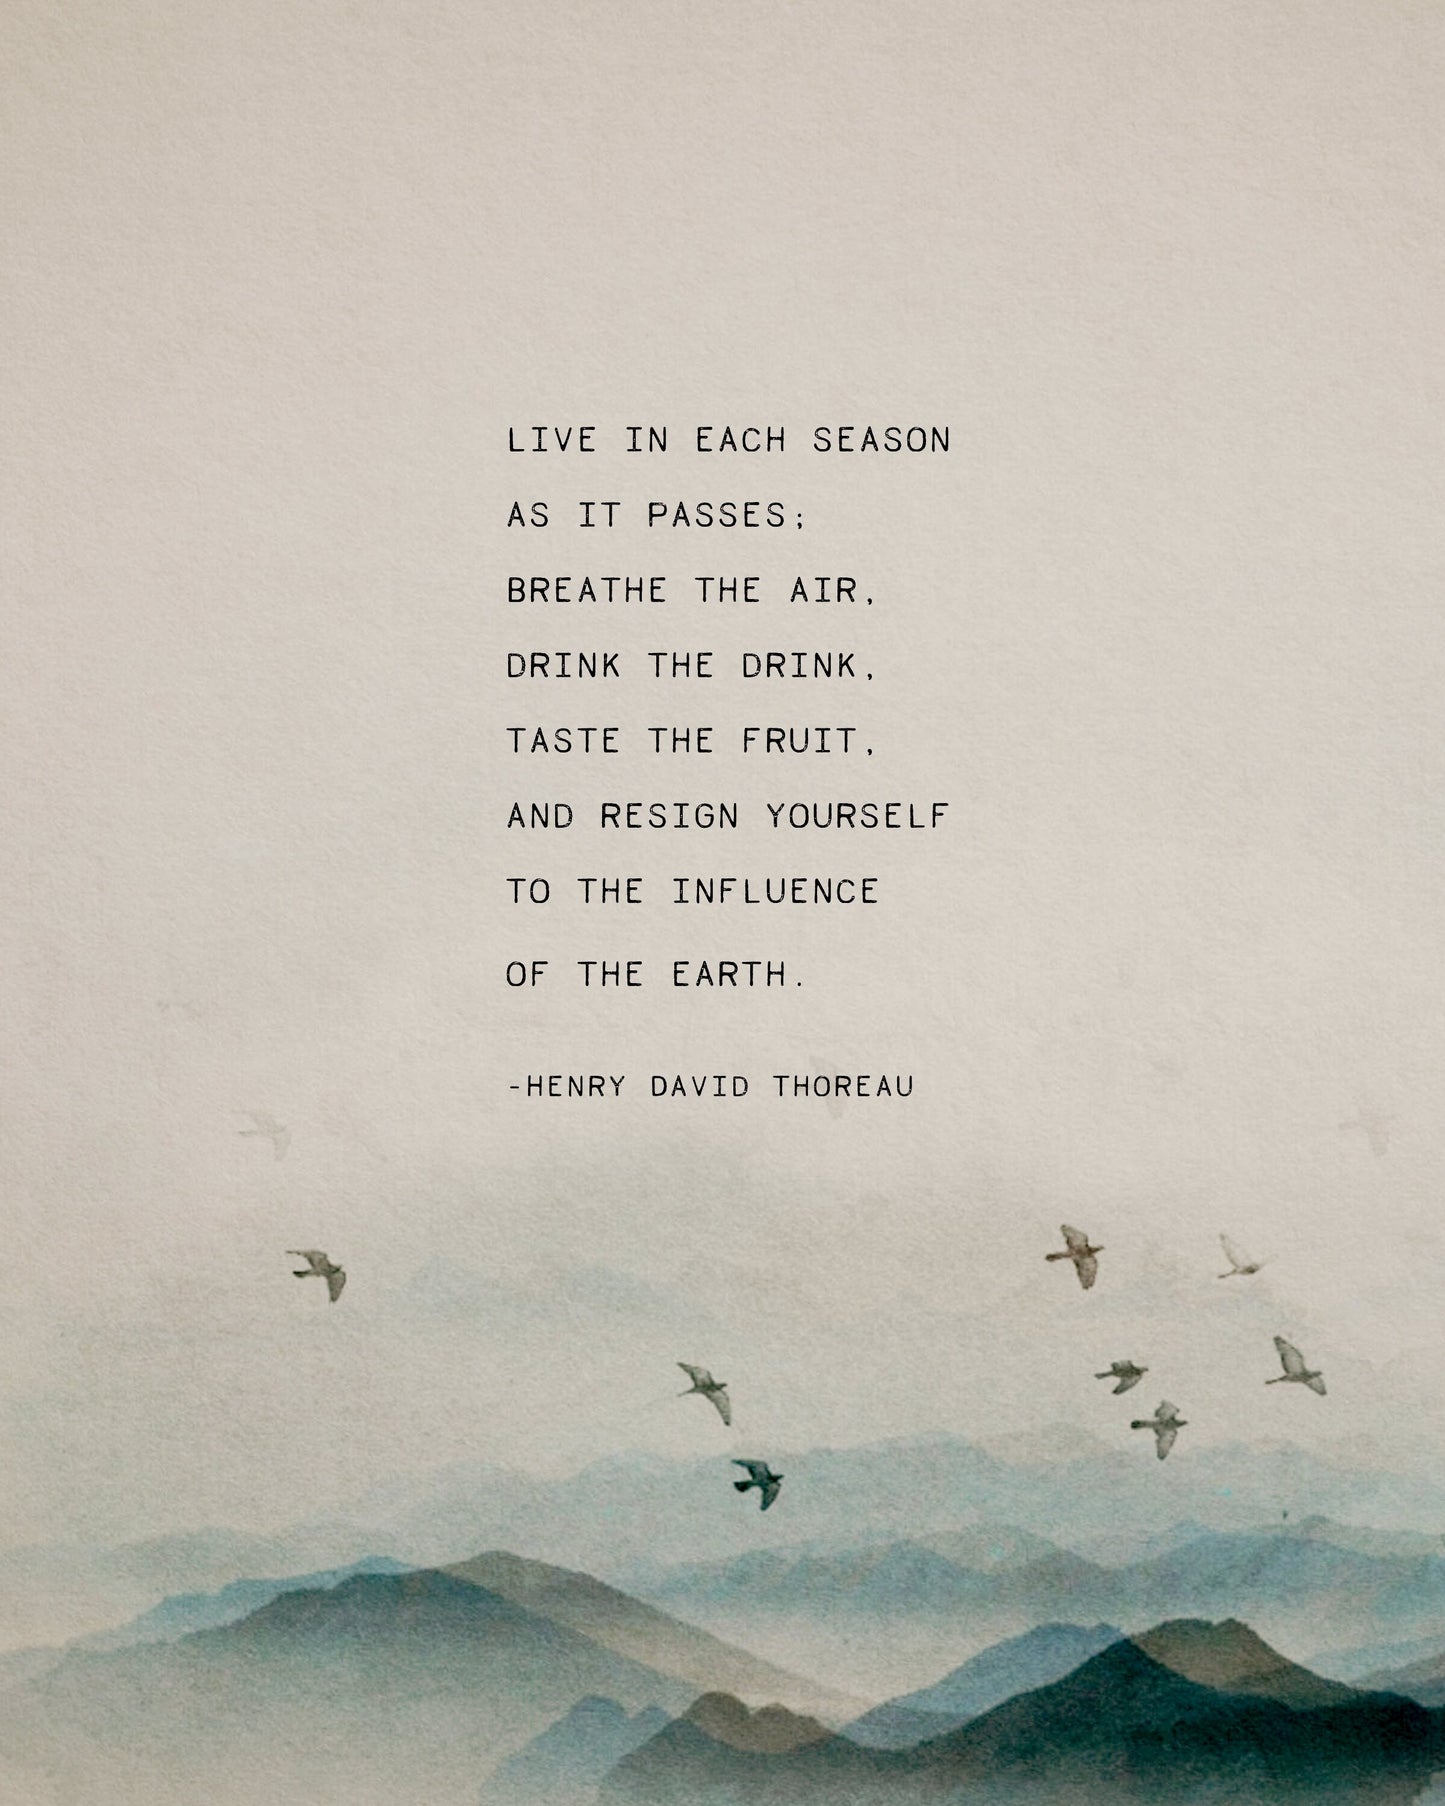 Henry David Thoreau quote from Walden "Live in each season as it passes..." nature wall decor